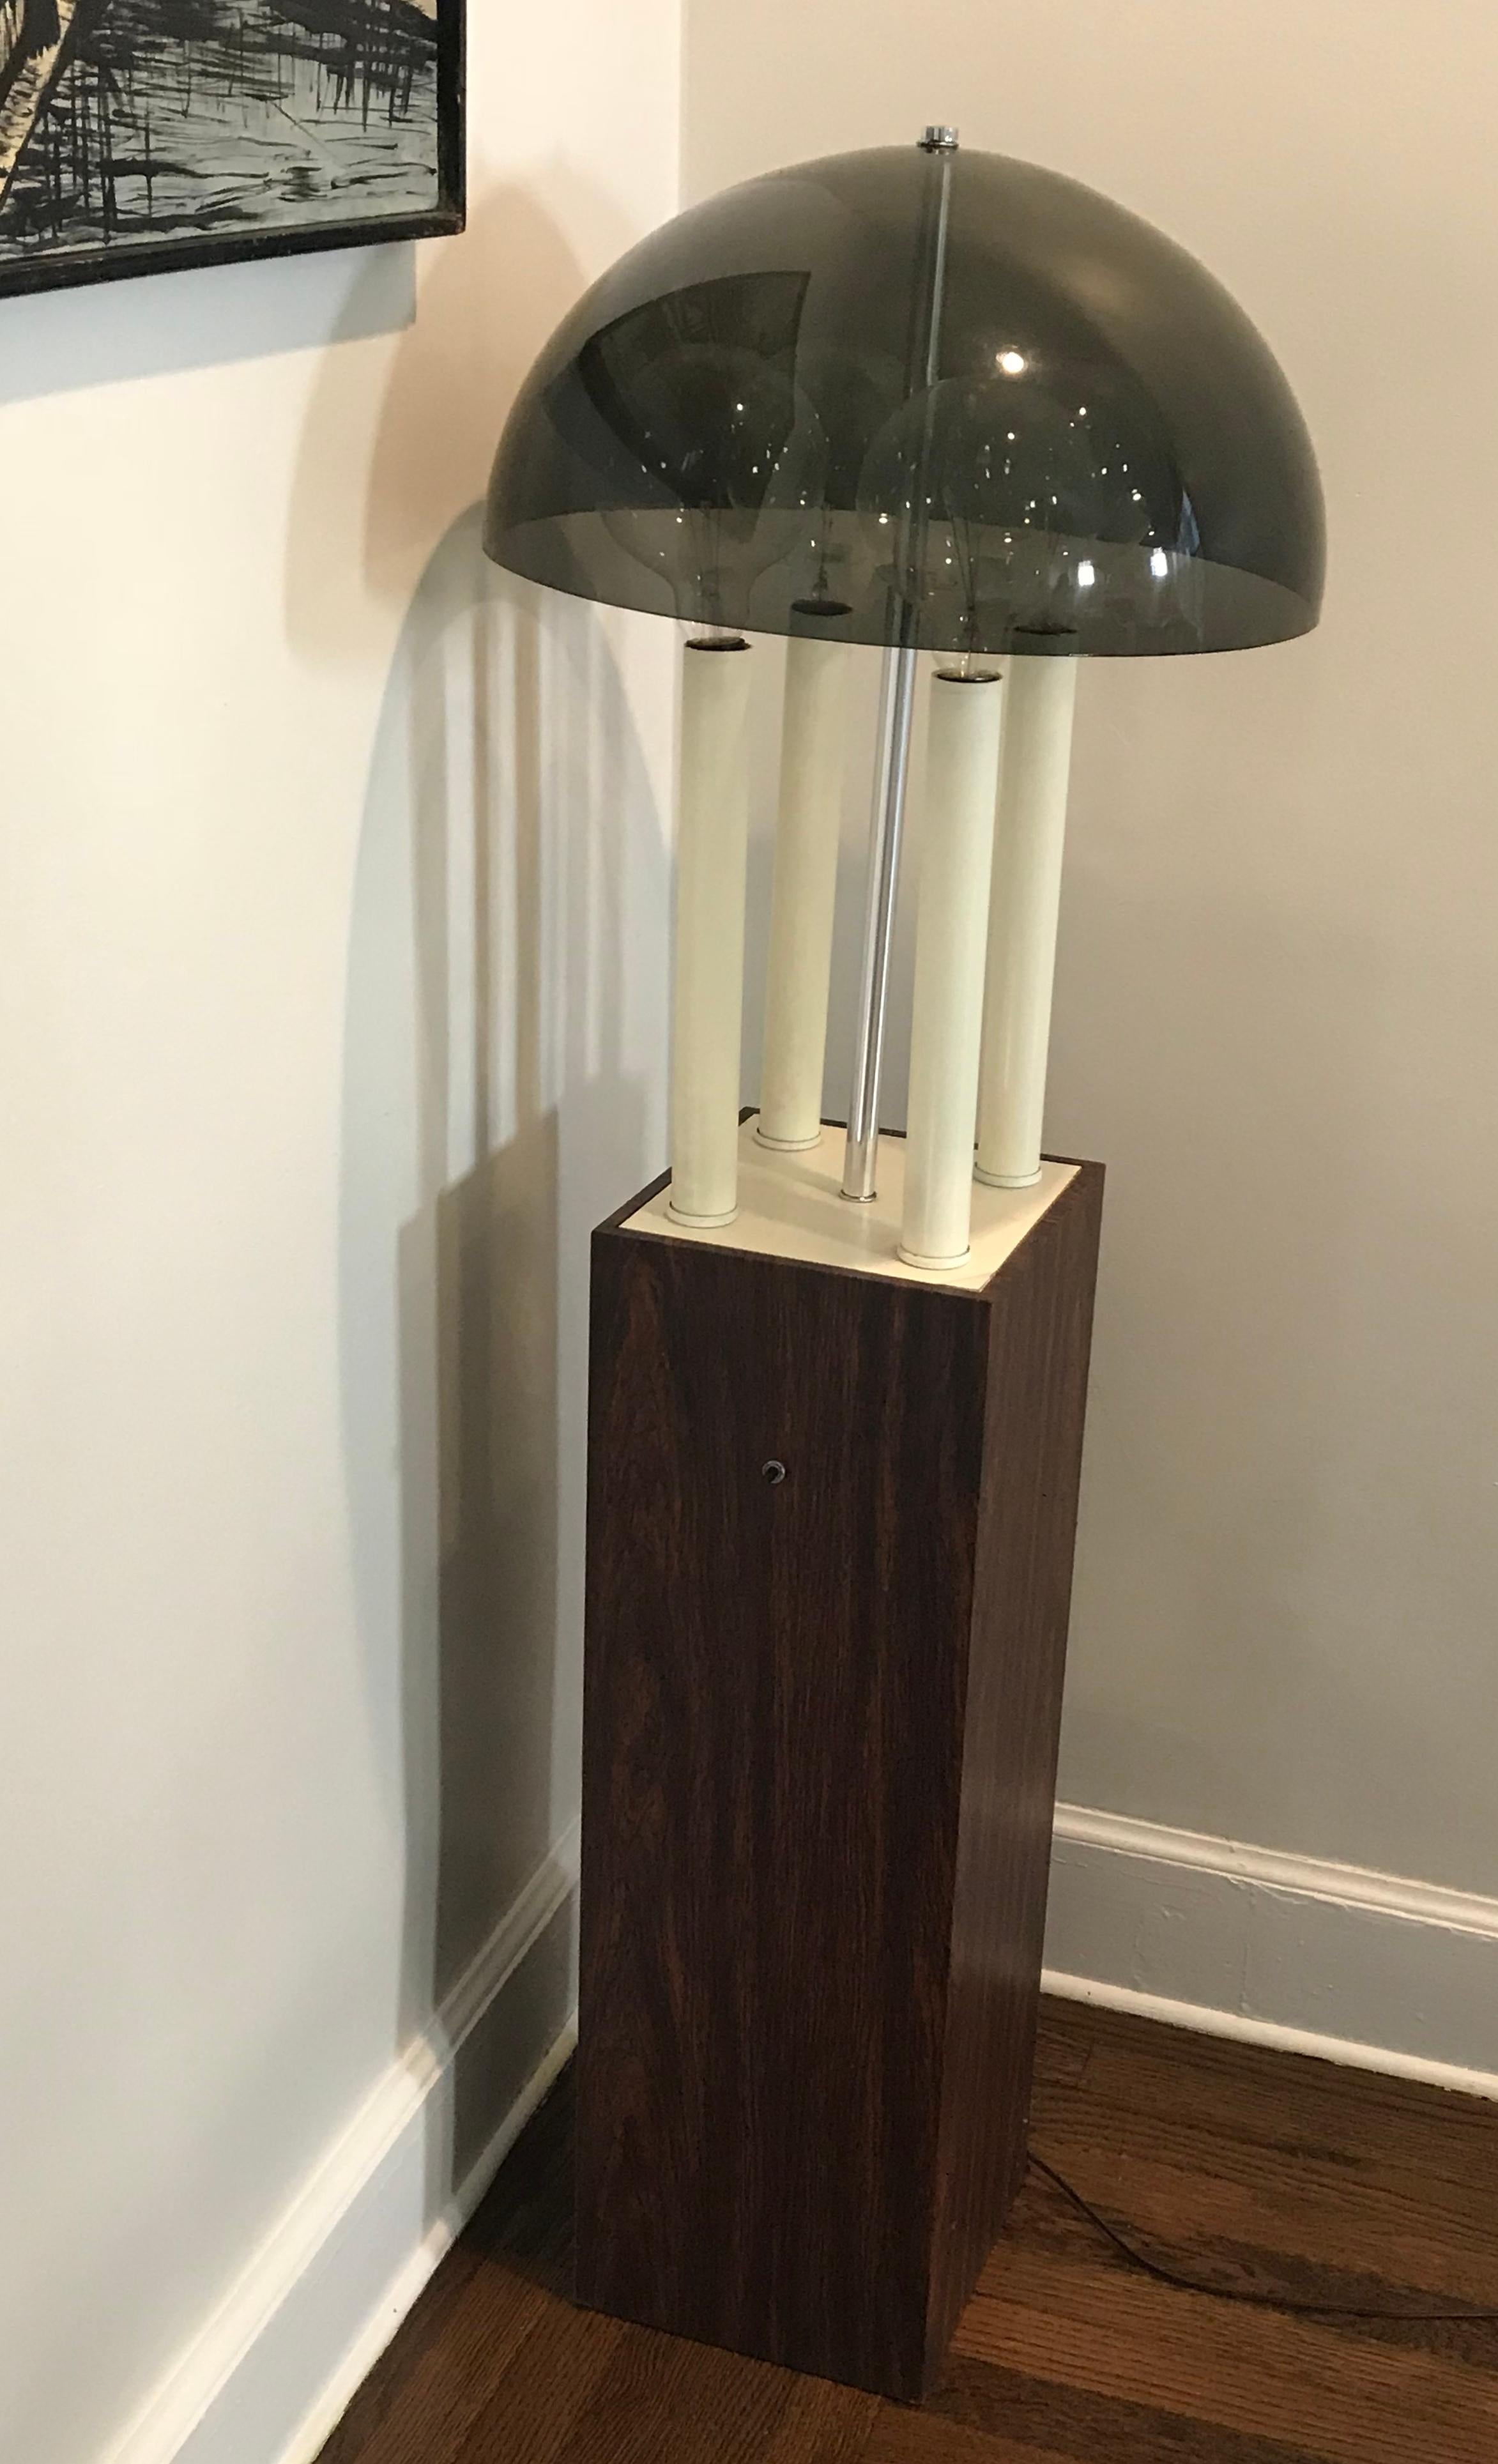 Funky midcentury 1970s floor lamp with four bulbs and smoked gray plastic dome shade, faux rosewood square base. Rewiring recommended.